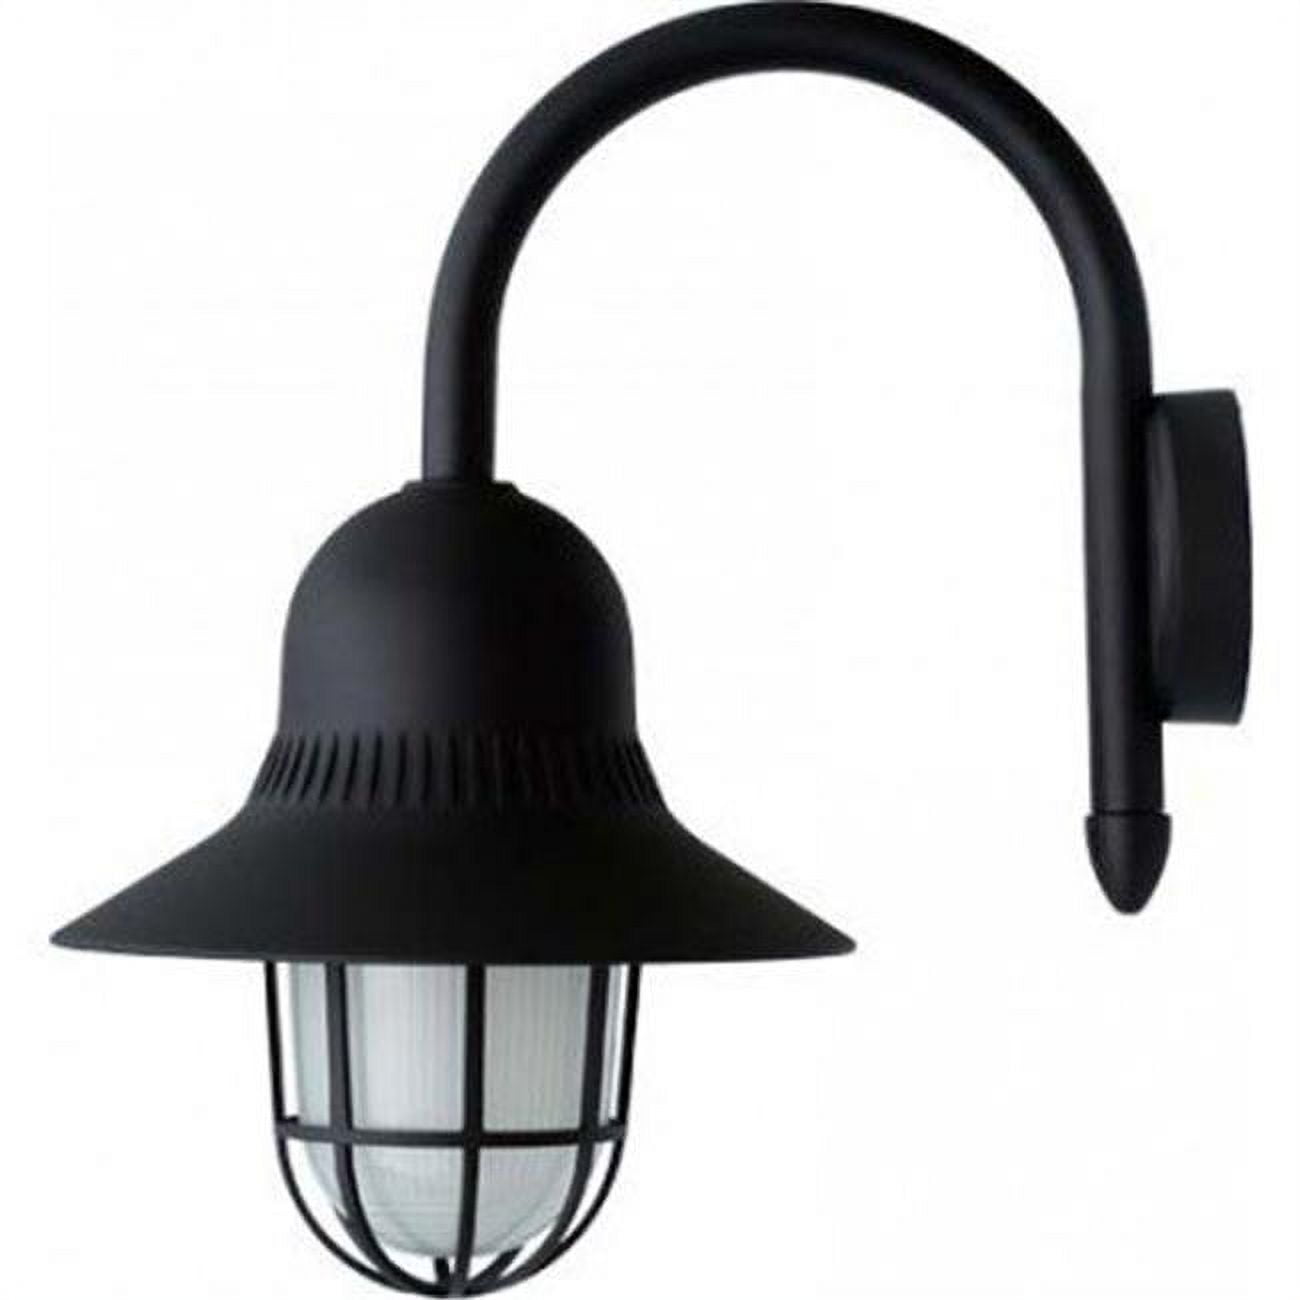 Picture of Dabmar Lighting GM997-LED16-B 16W & 85-265V LED Marquee Wall Light Fixture - Black